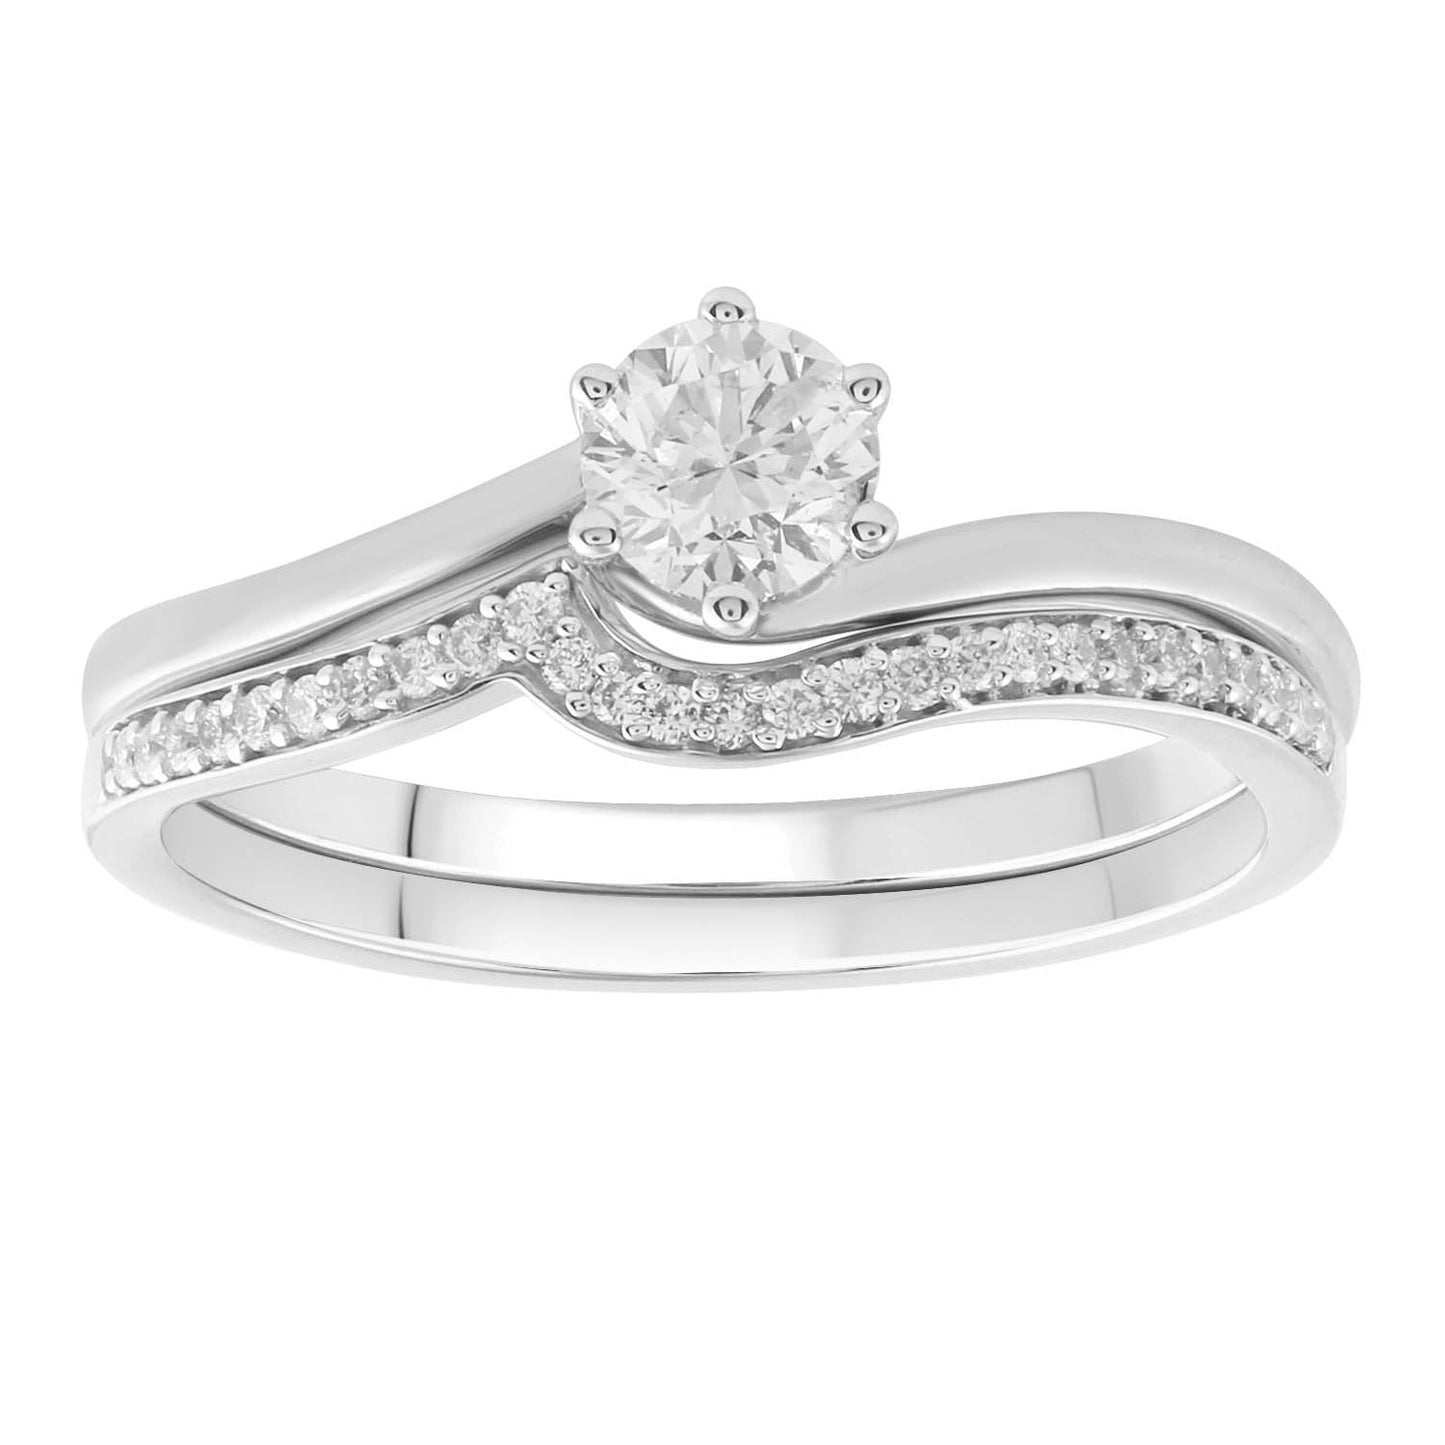 Engagment & Wedding Ring Set with 0.60ct Diamonds in 9K White Gold